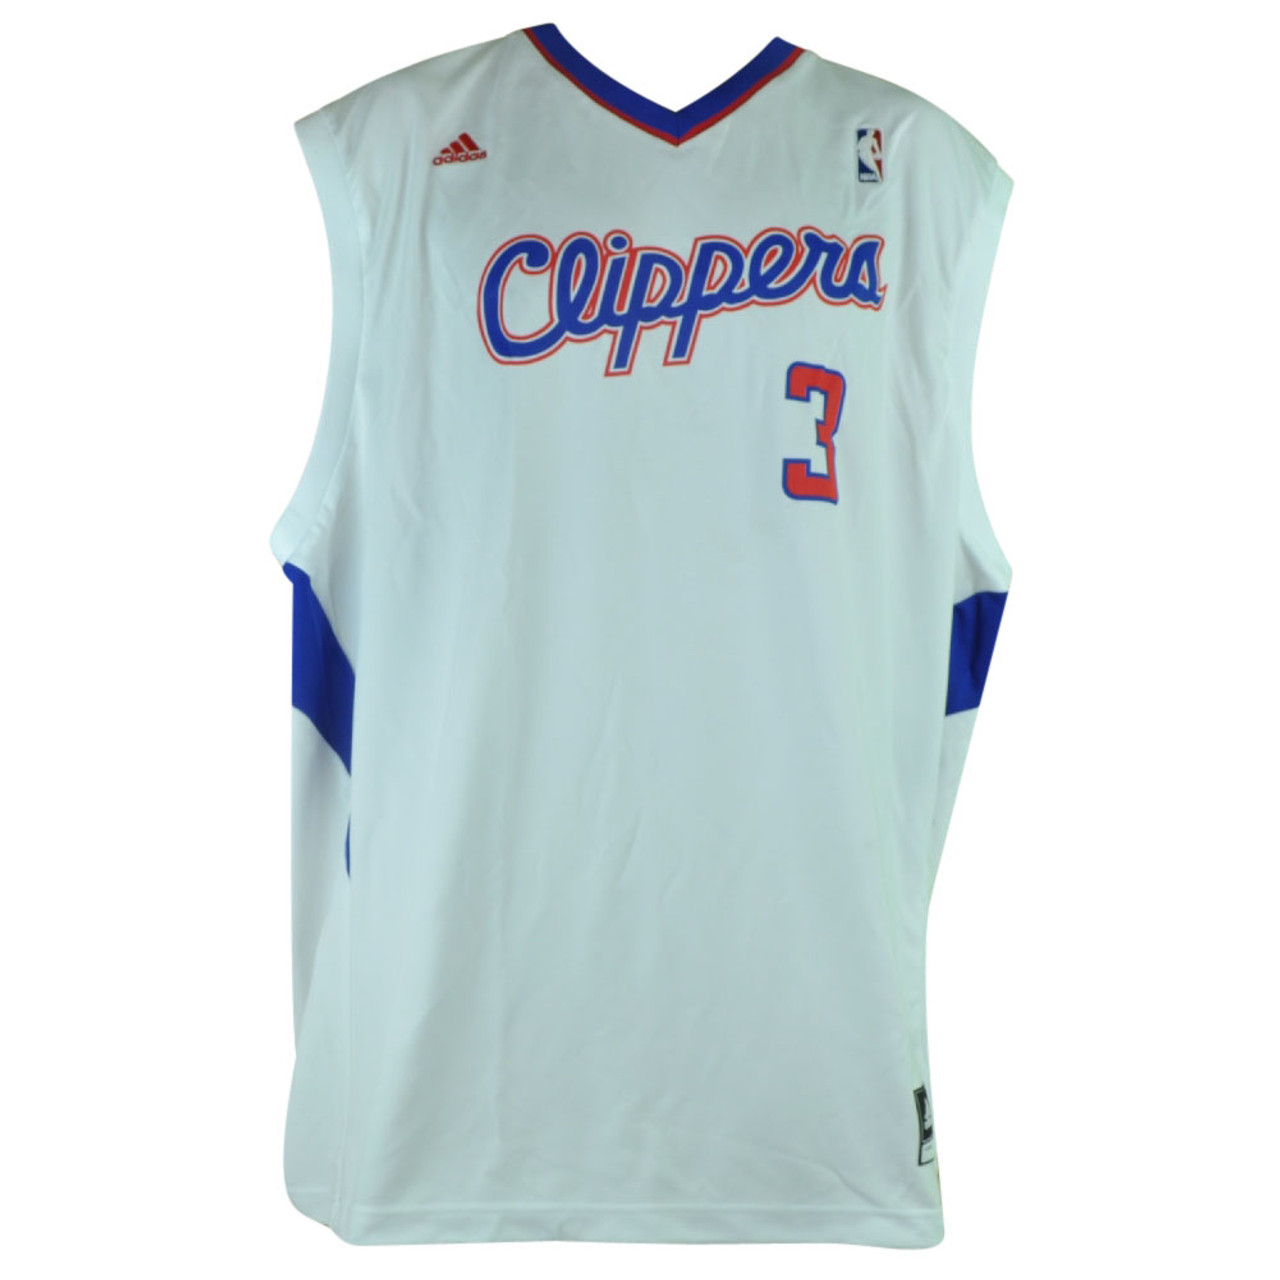 los angeles clippers blue jersey